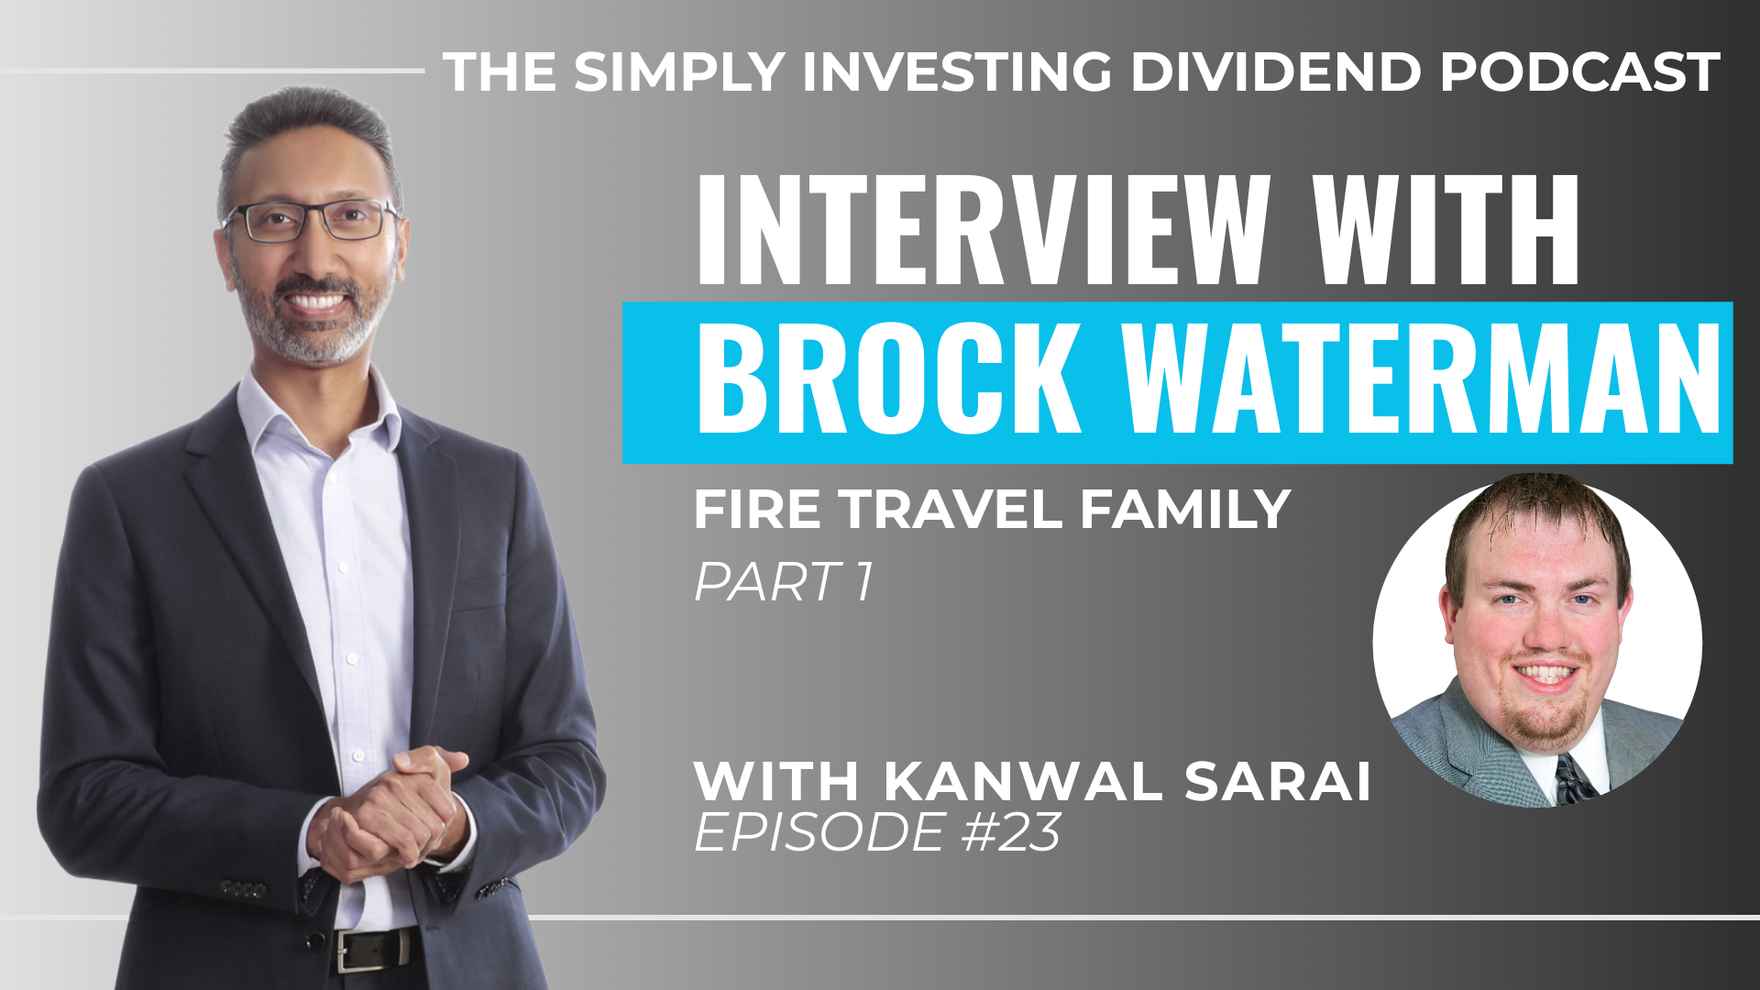 Simply Investing Dividend Podcast Episode 23 - Interview with Brock Waterman of FIRE Travel Family (part 1)